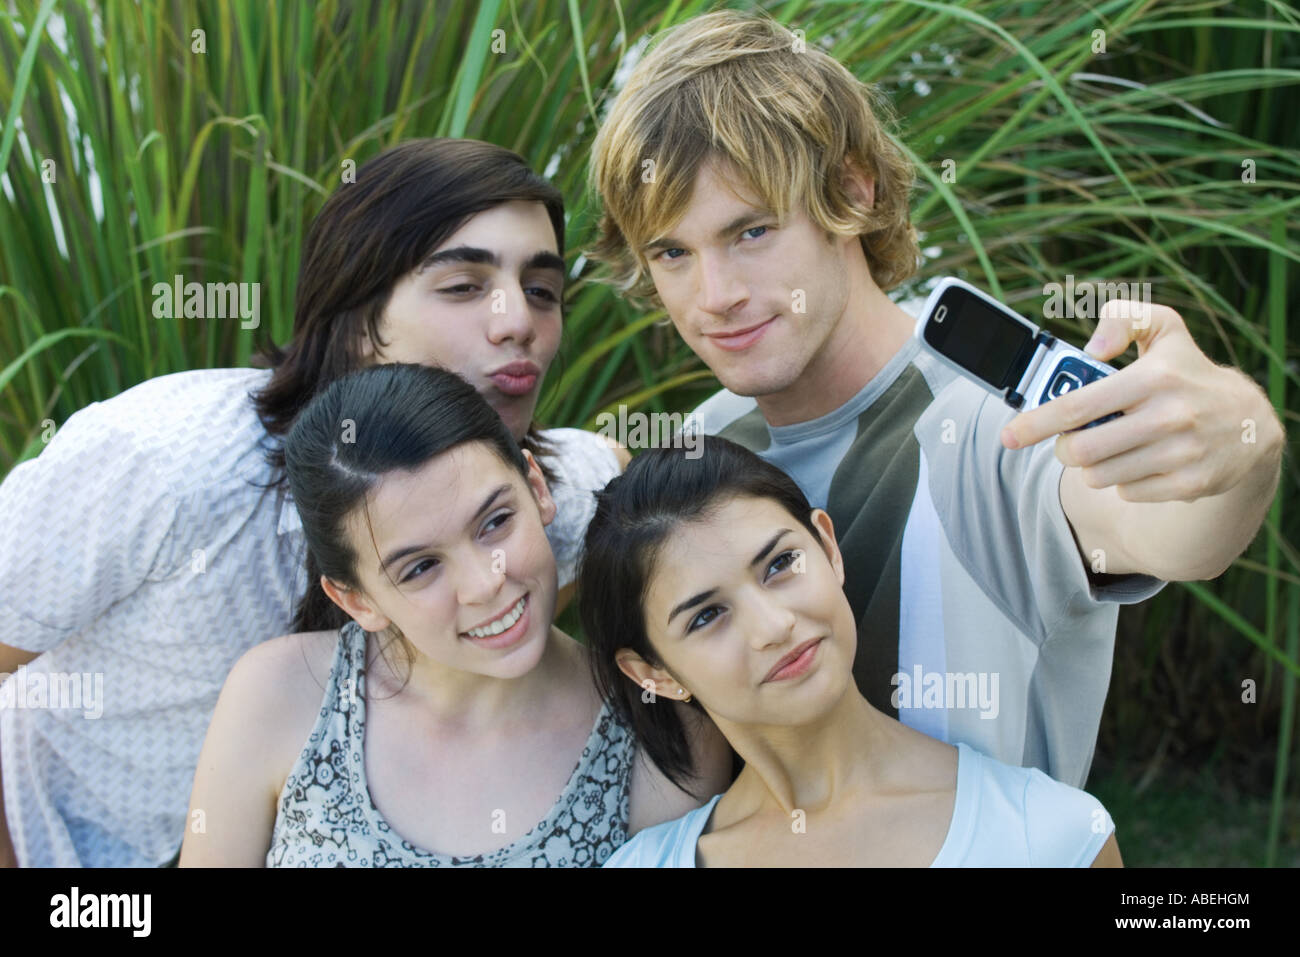 Group of young friends posing while man takes photo with cell phone Stock Photo